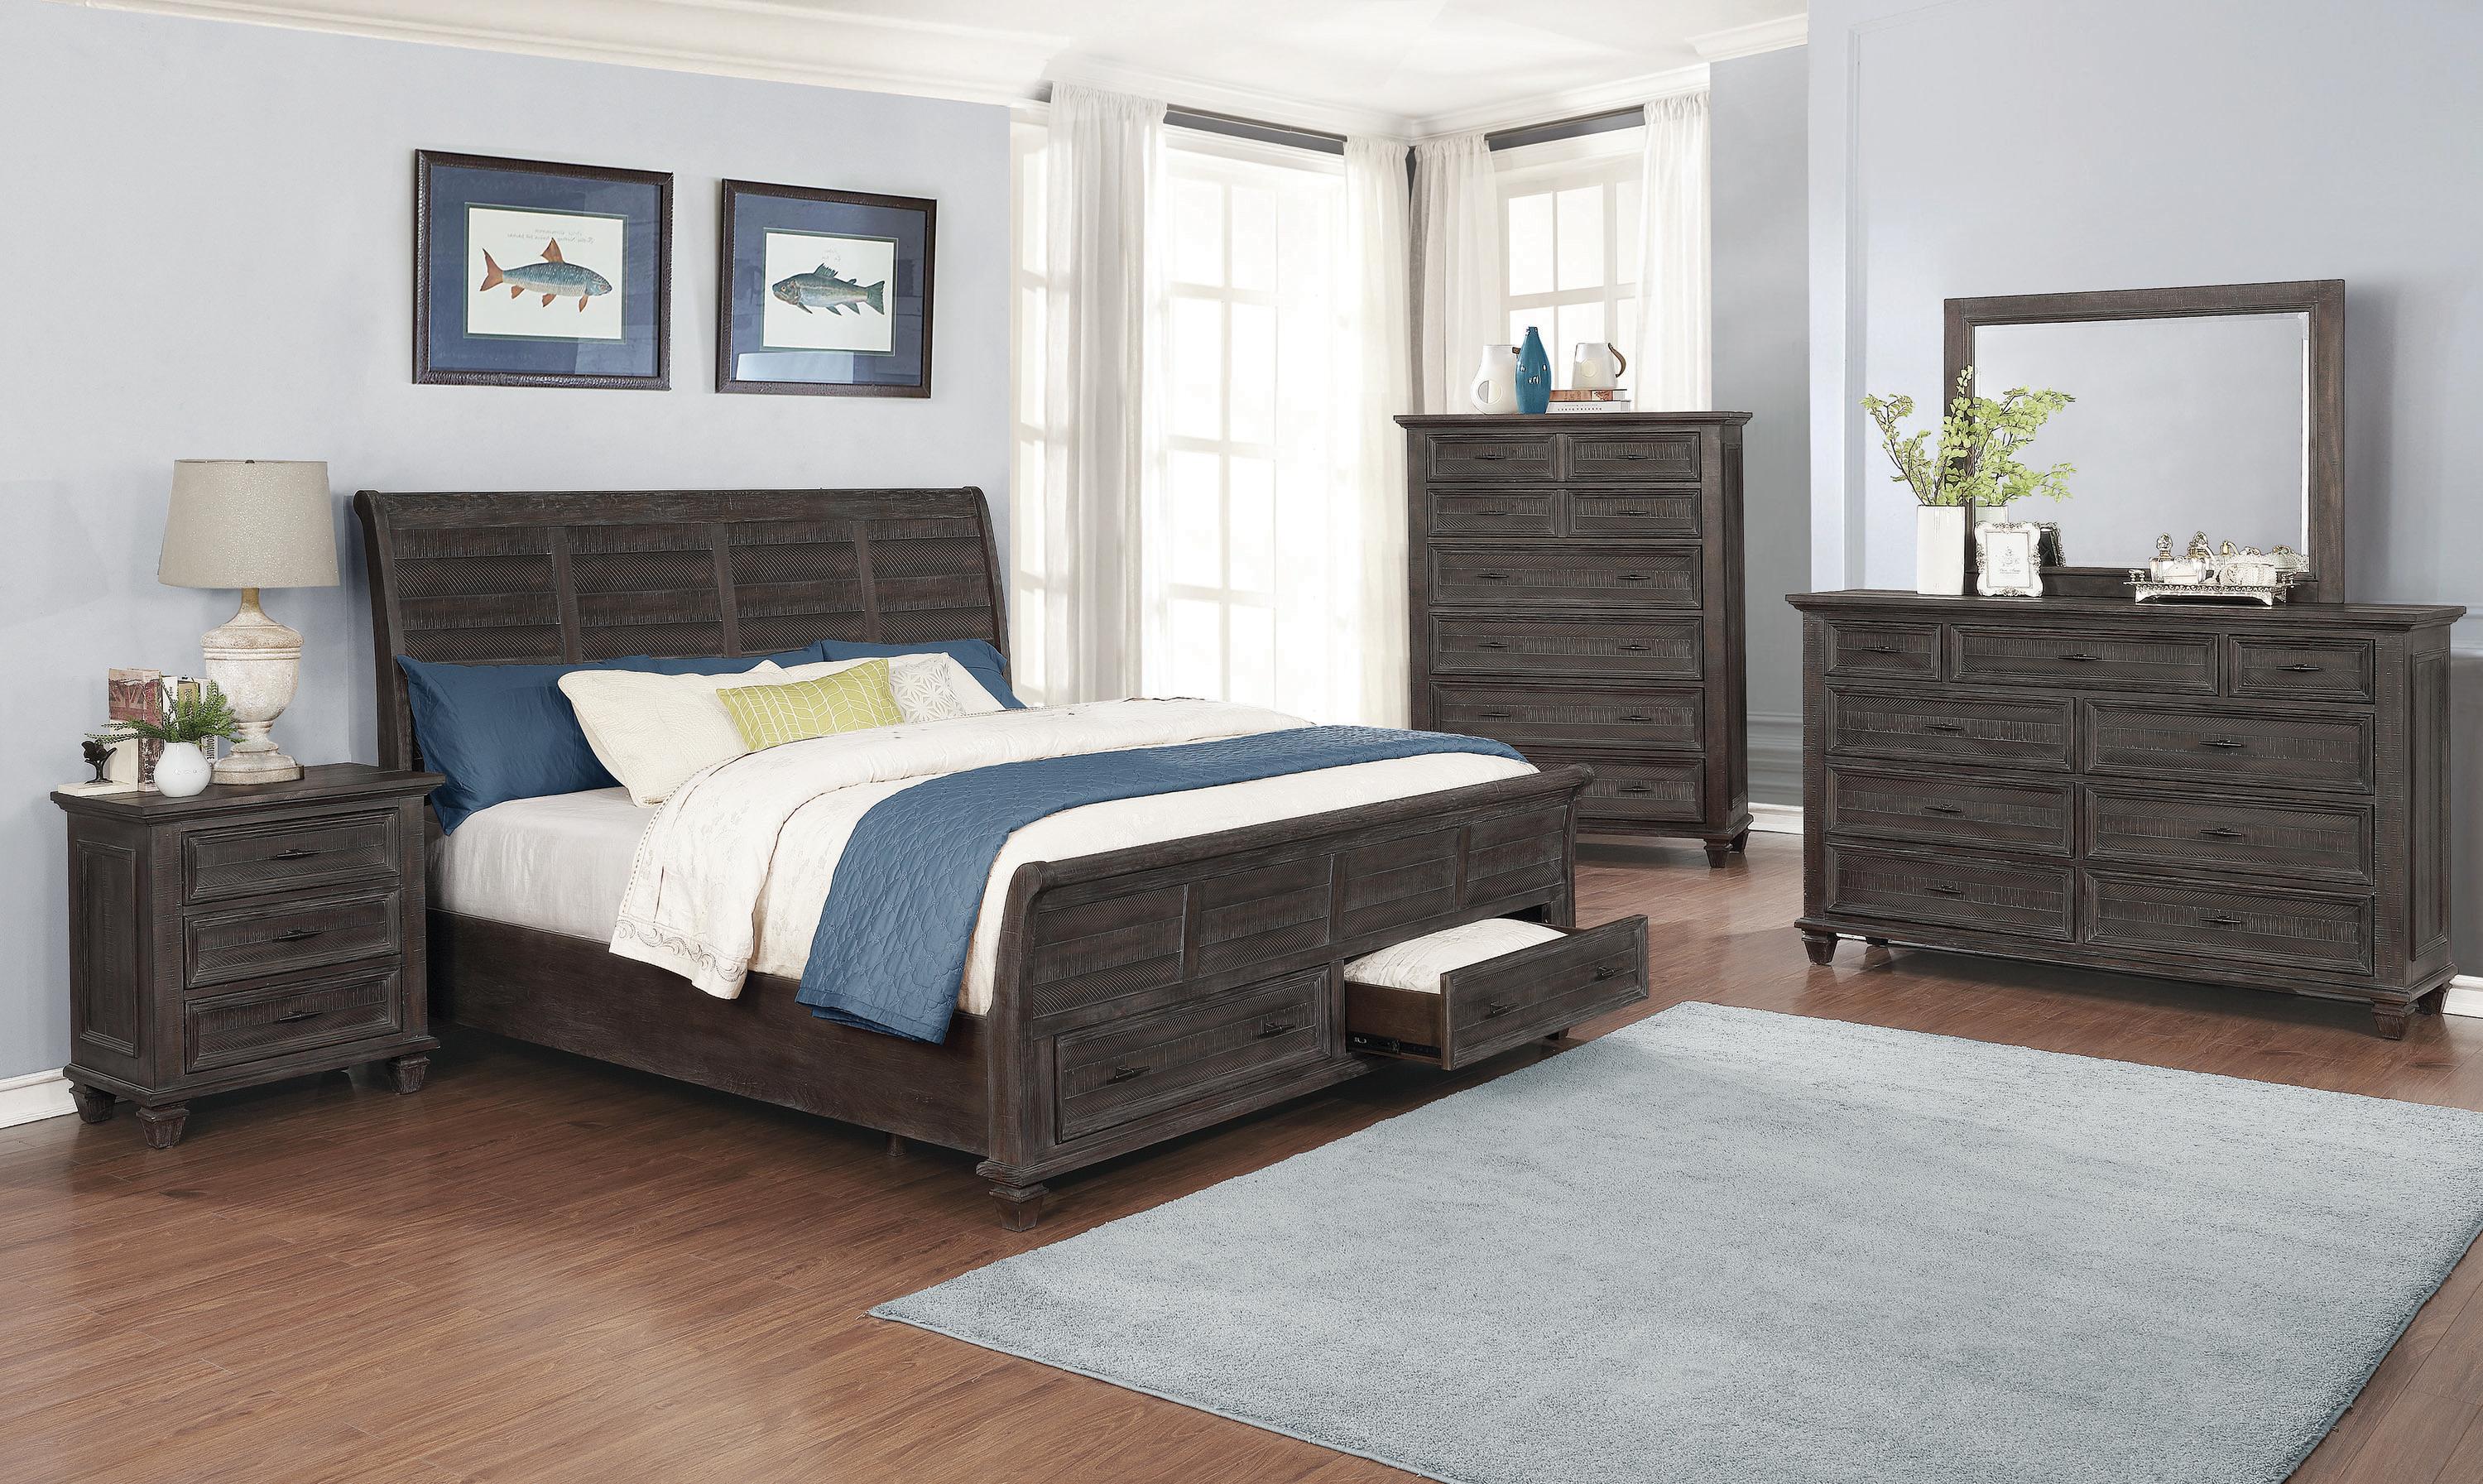 

    
Transitional Weathered Carbon Wood Queen Bedroom Set 3pcs Coaster 222880Q Atascadero
